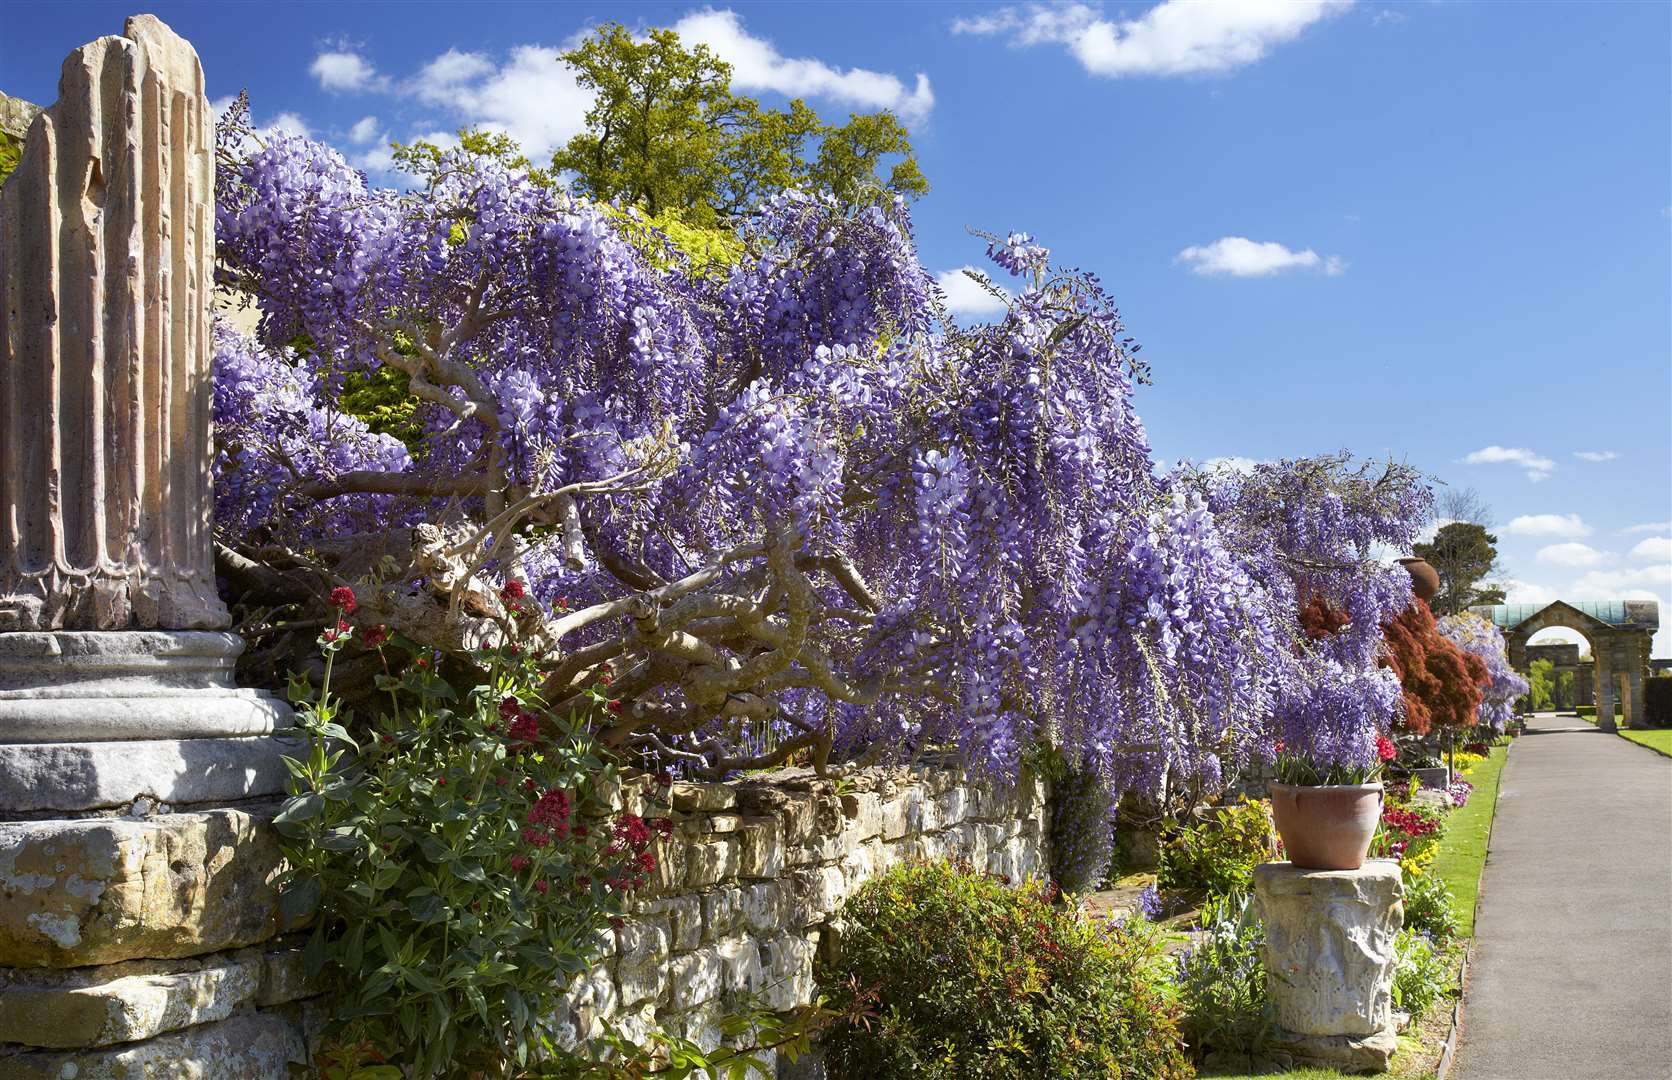 Wisteria 'Black Dragon' with its long plumes of flowers on the Pompeiian Wall